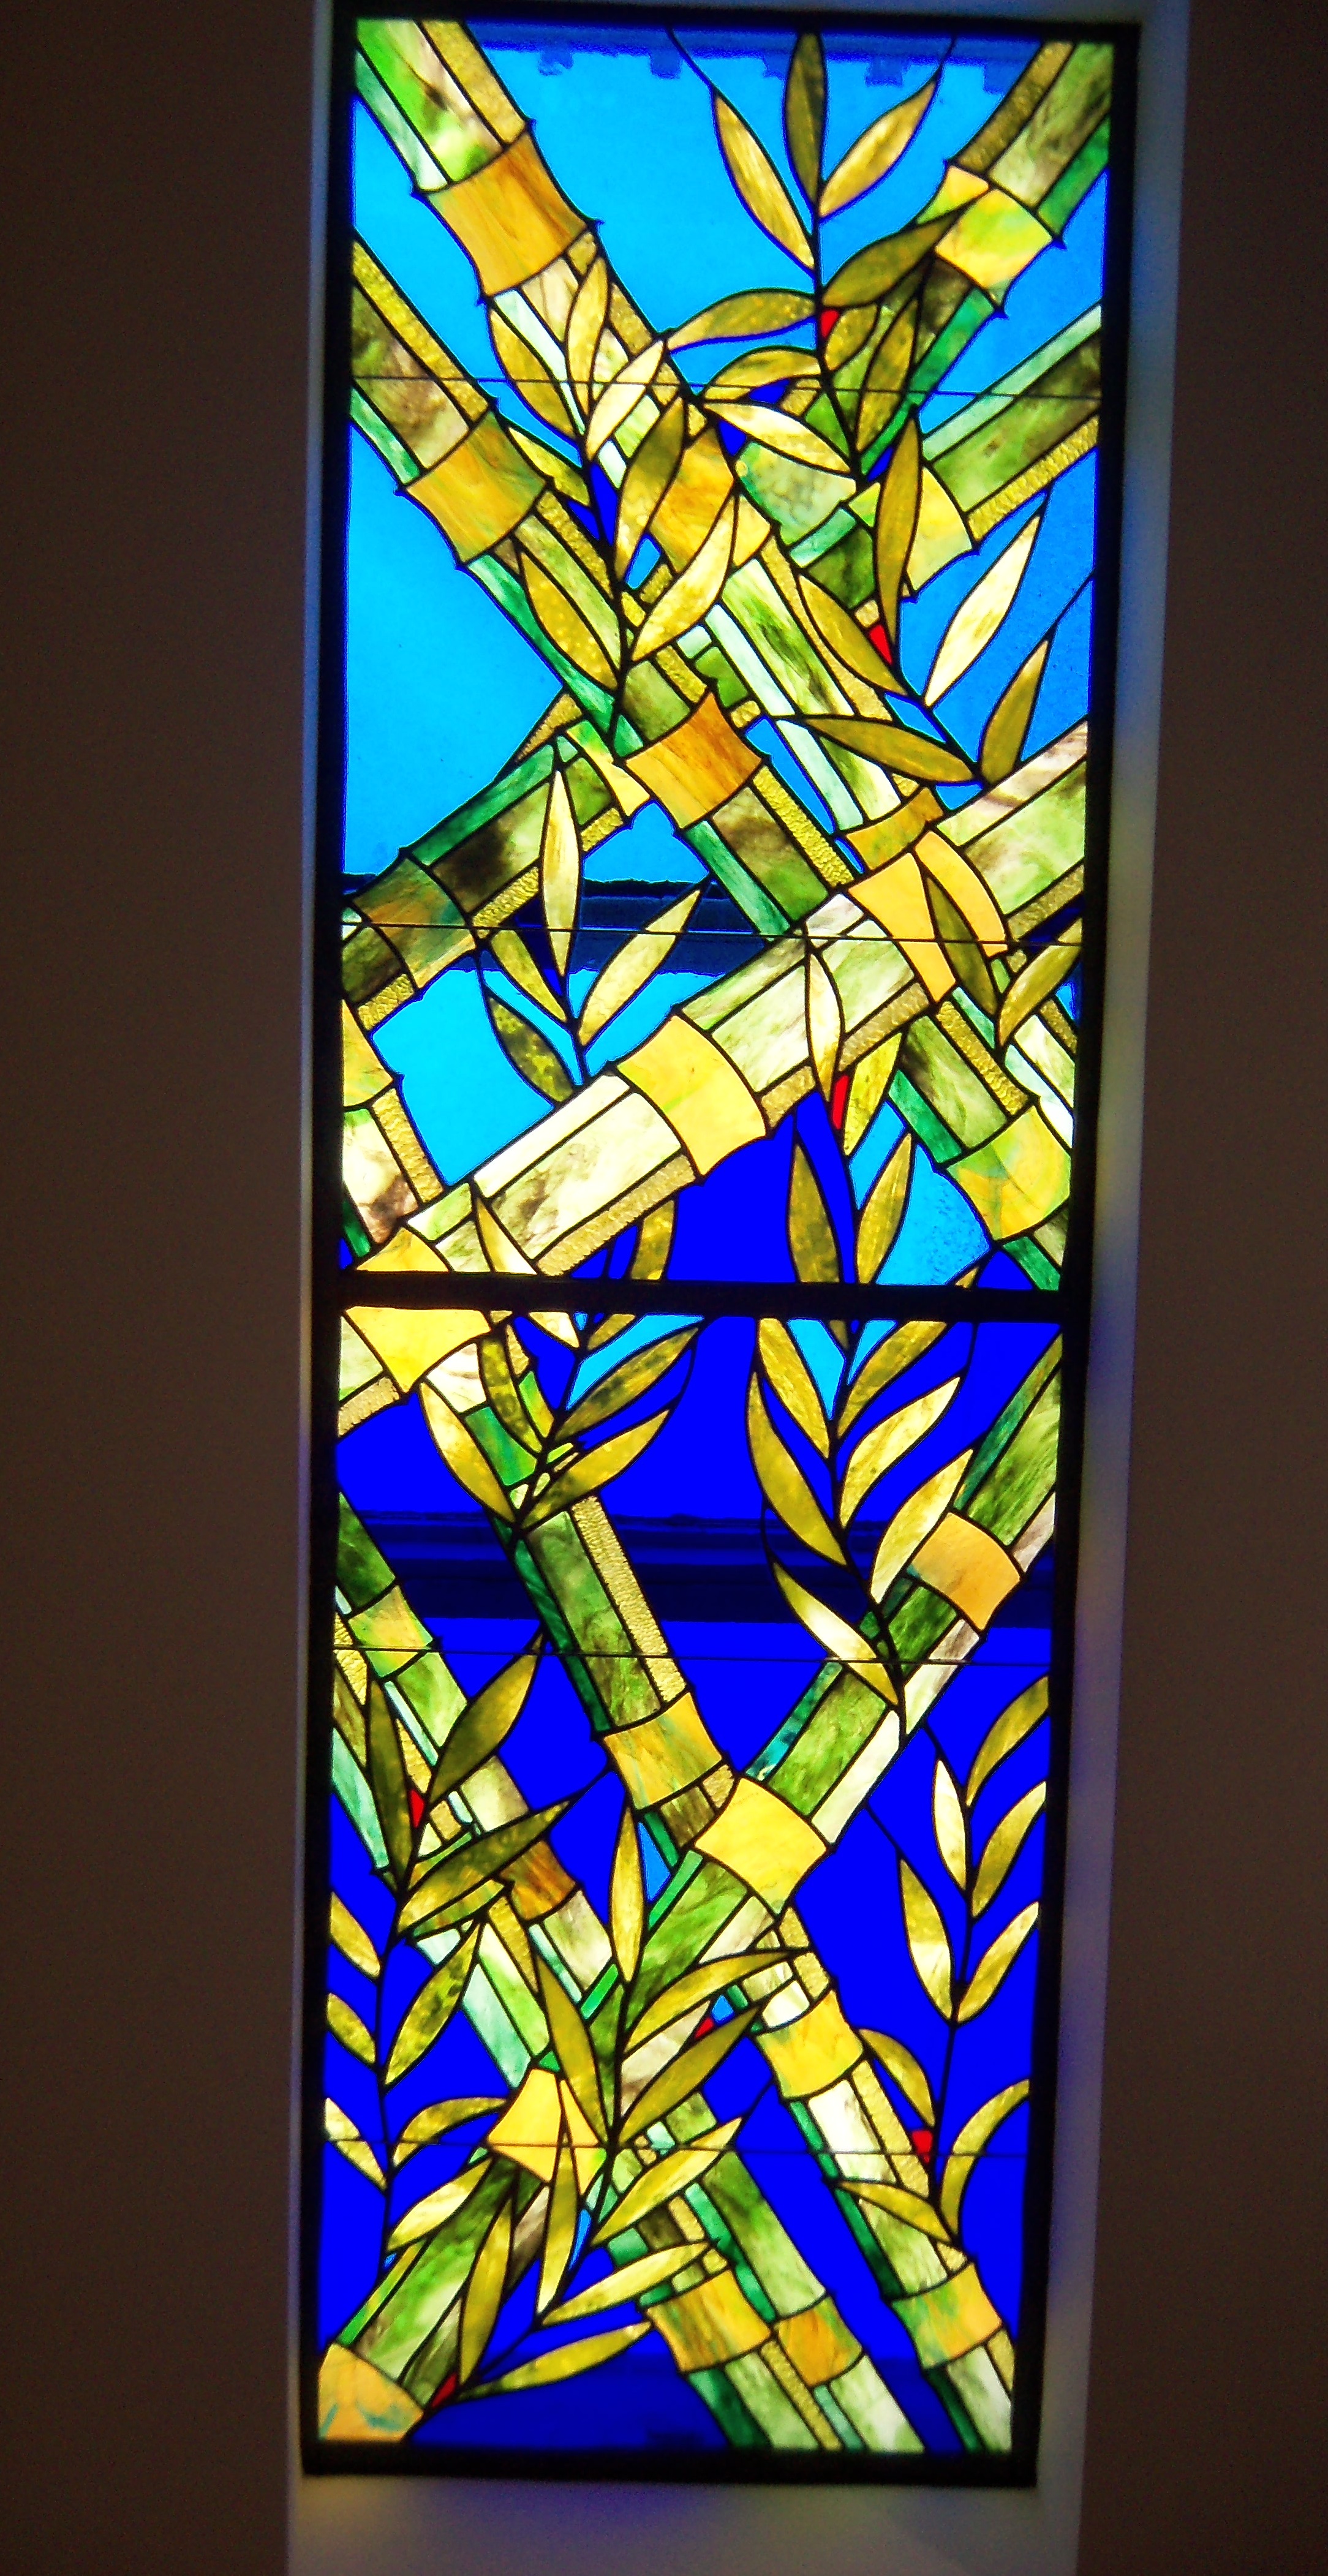 A stained-glass skylight that Patti Kelly created for a family townhouse on W. 87th St. near Central Park West.